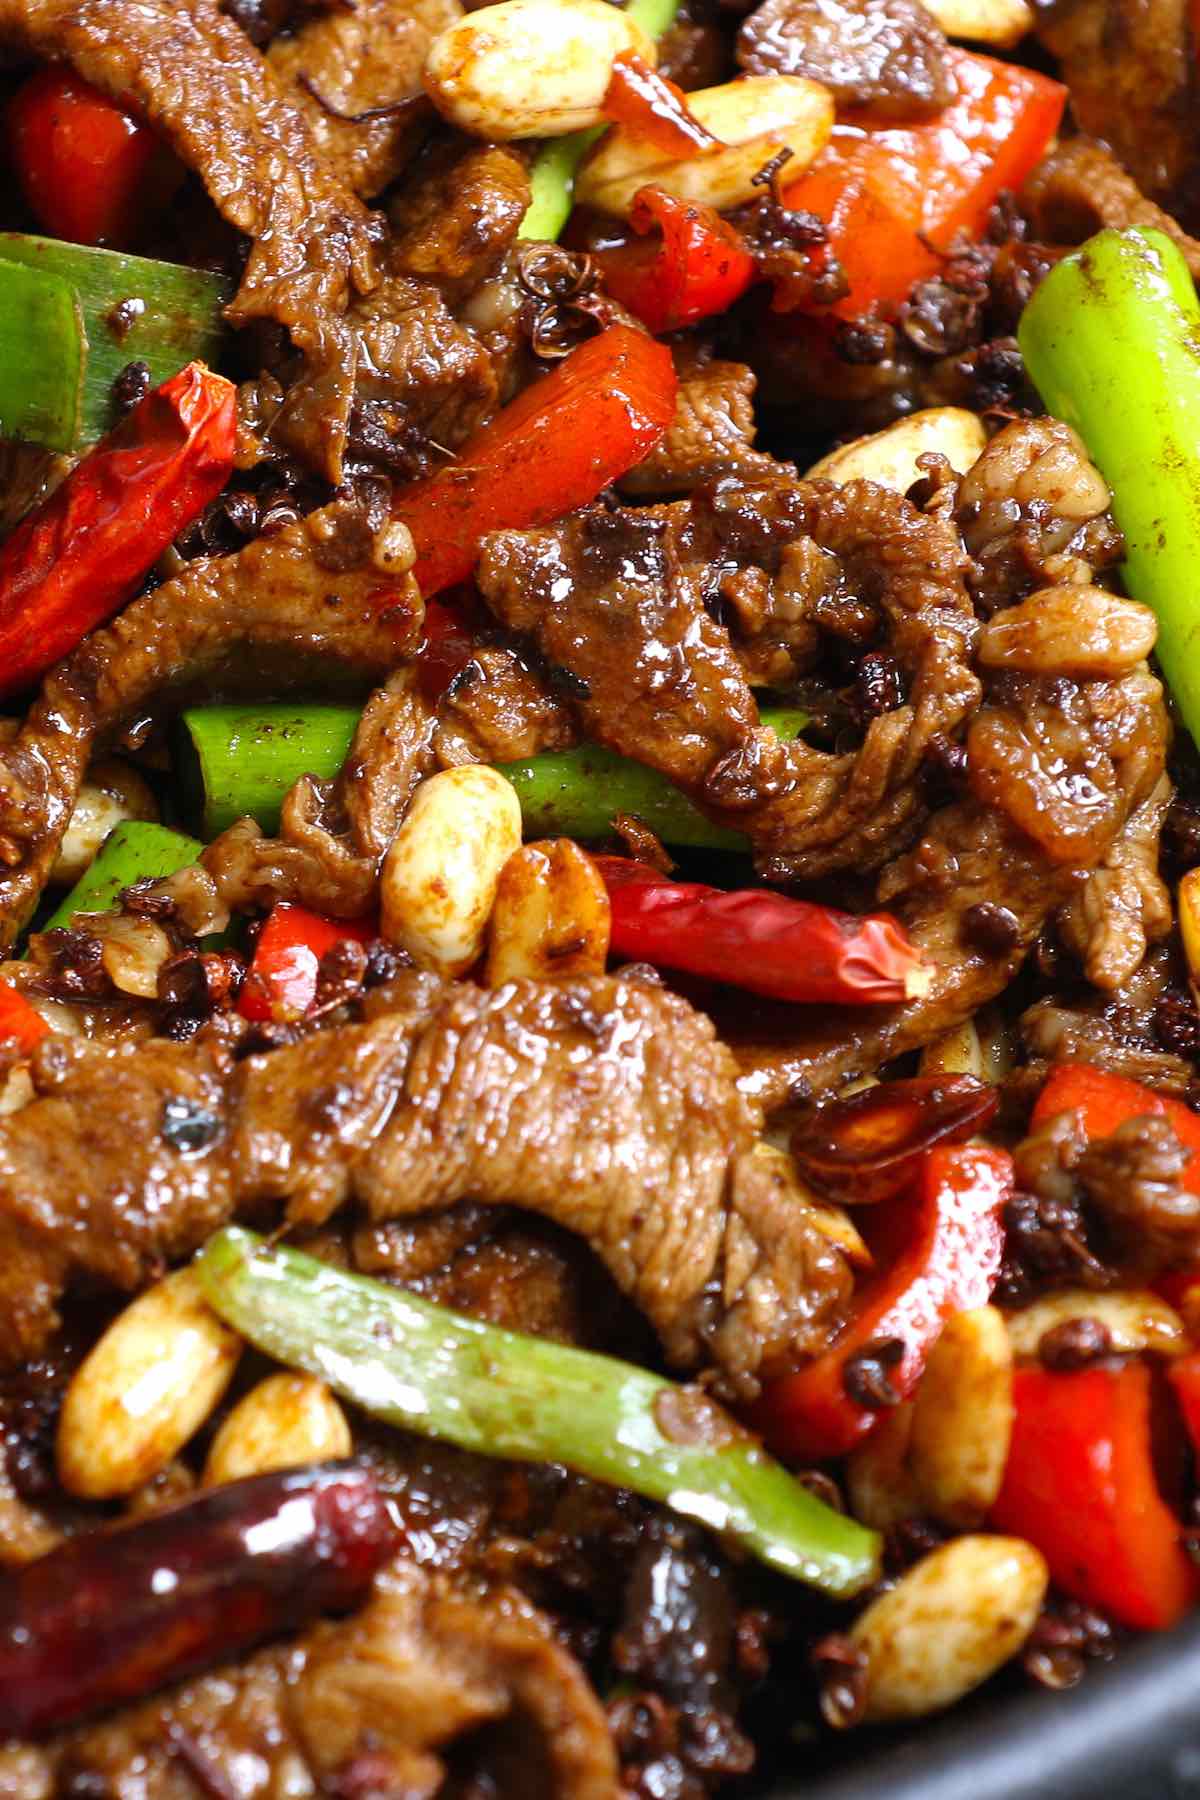 Closeup of Szechuan beef with bell peppers, peanuts and chilis